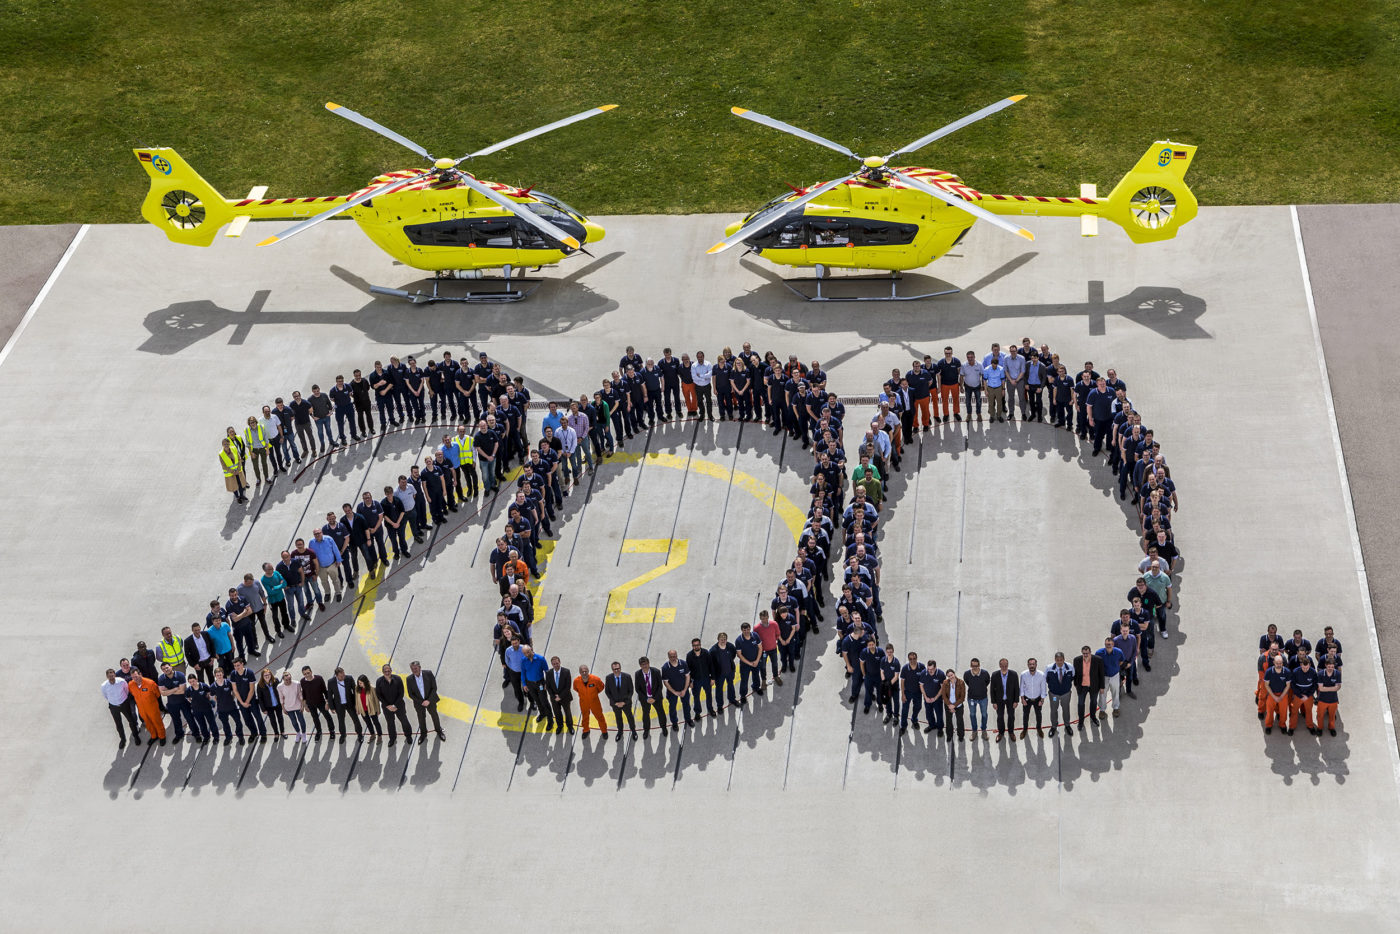 Norsk Luftambulanse operates eight Airbus H145s and seven H135s, and the 200th H145 delivery marks the final helicopter to be delivered under its current order.